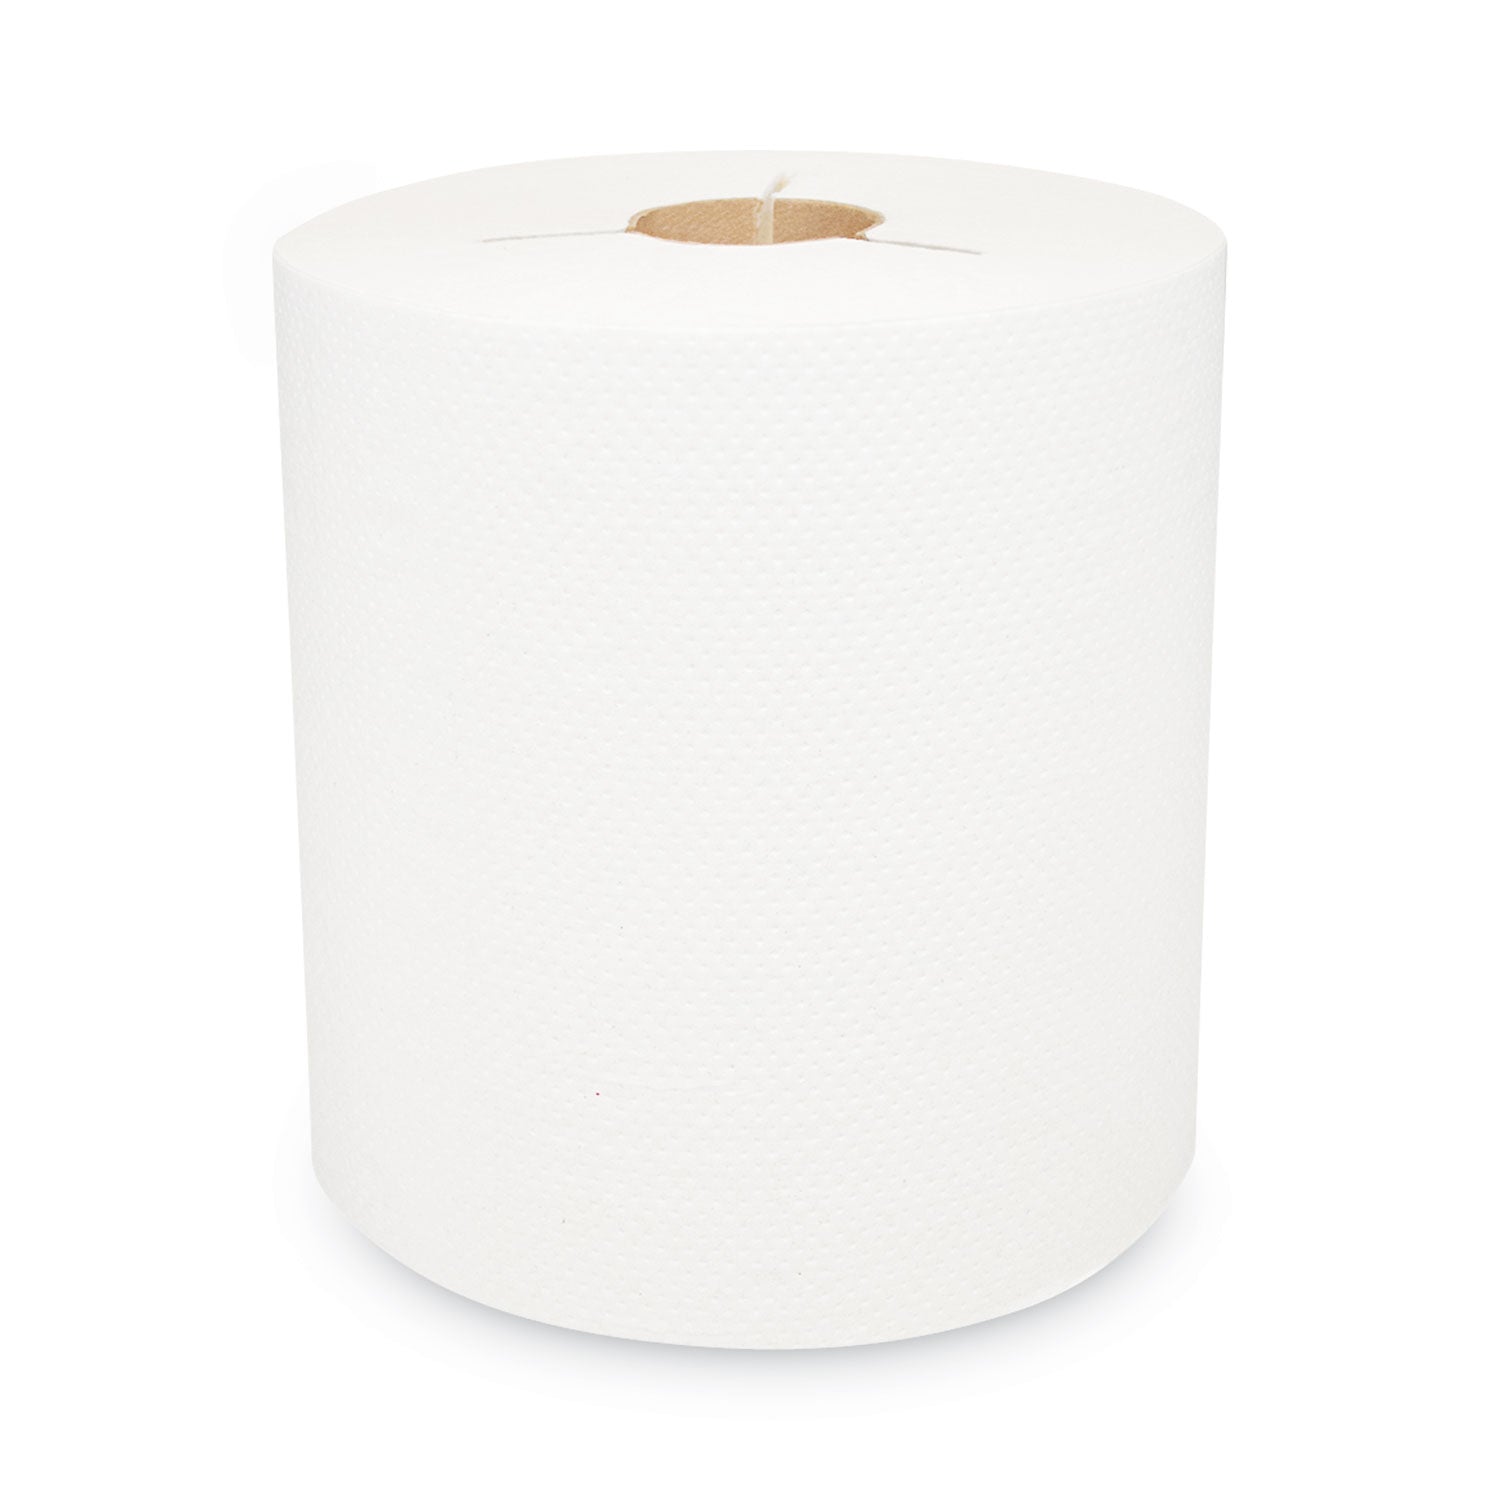 morsoft-controlled-towels-y-notch-1-ply-8-x-800-ft-white-6-rolls-carton_mor400wy - 3